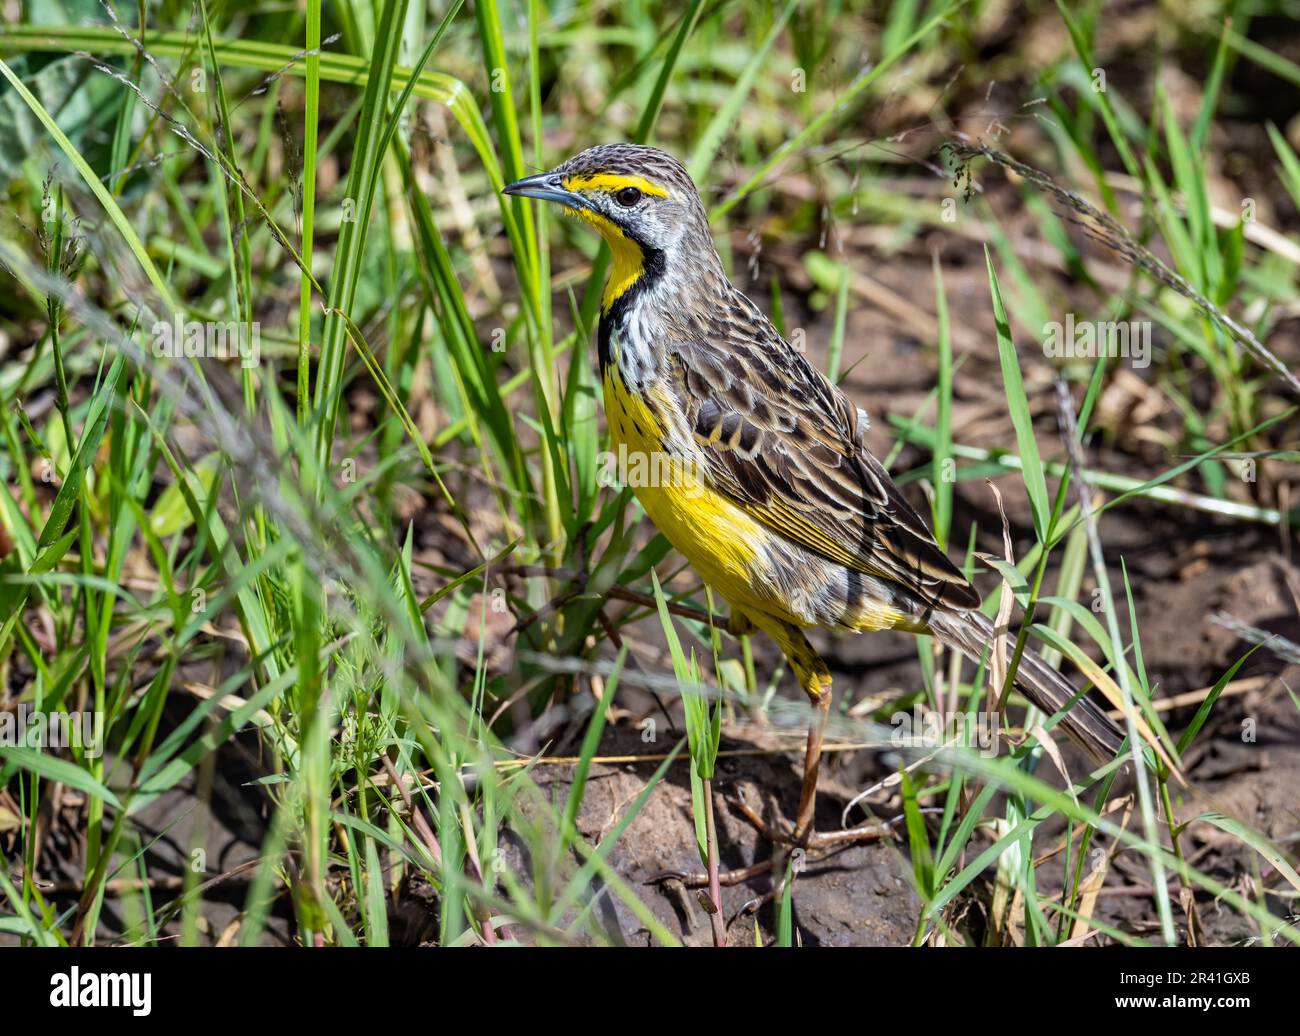 A Yellow-throated Longclaw (Macronyx croceus) foraging in grass field. Kenya, Africa. Stock Photo